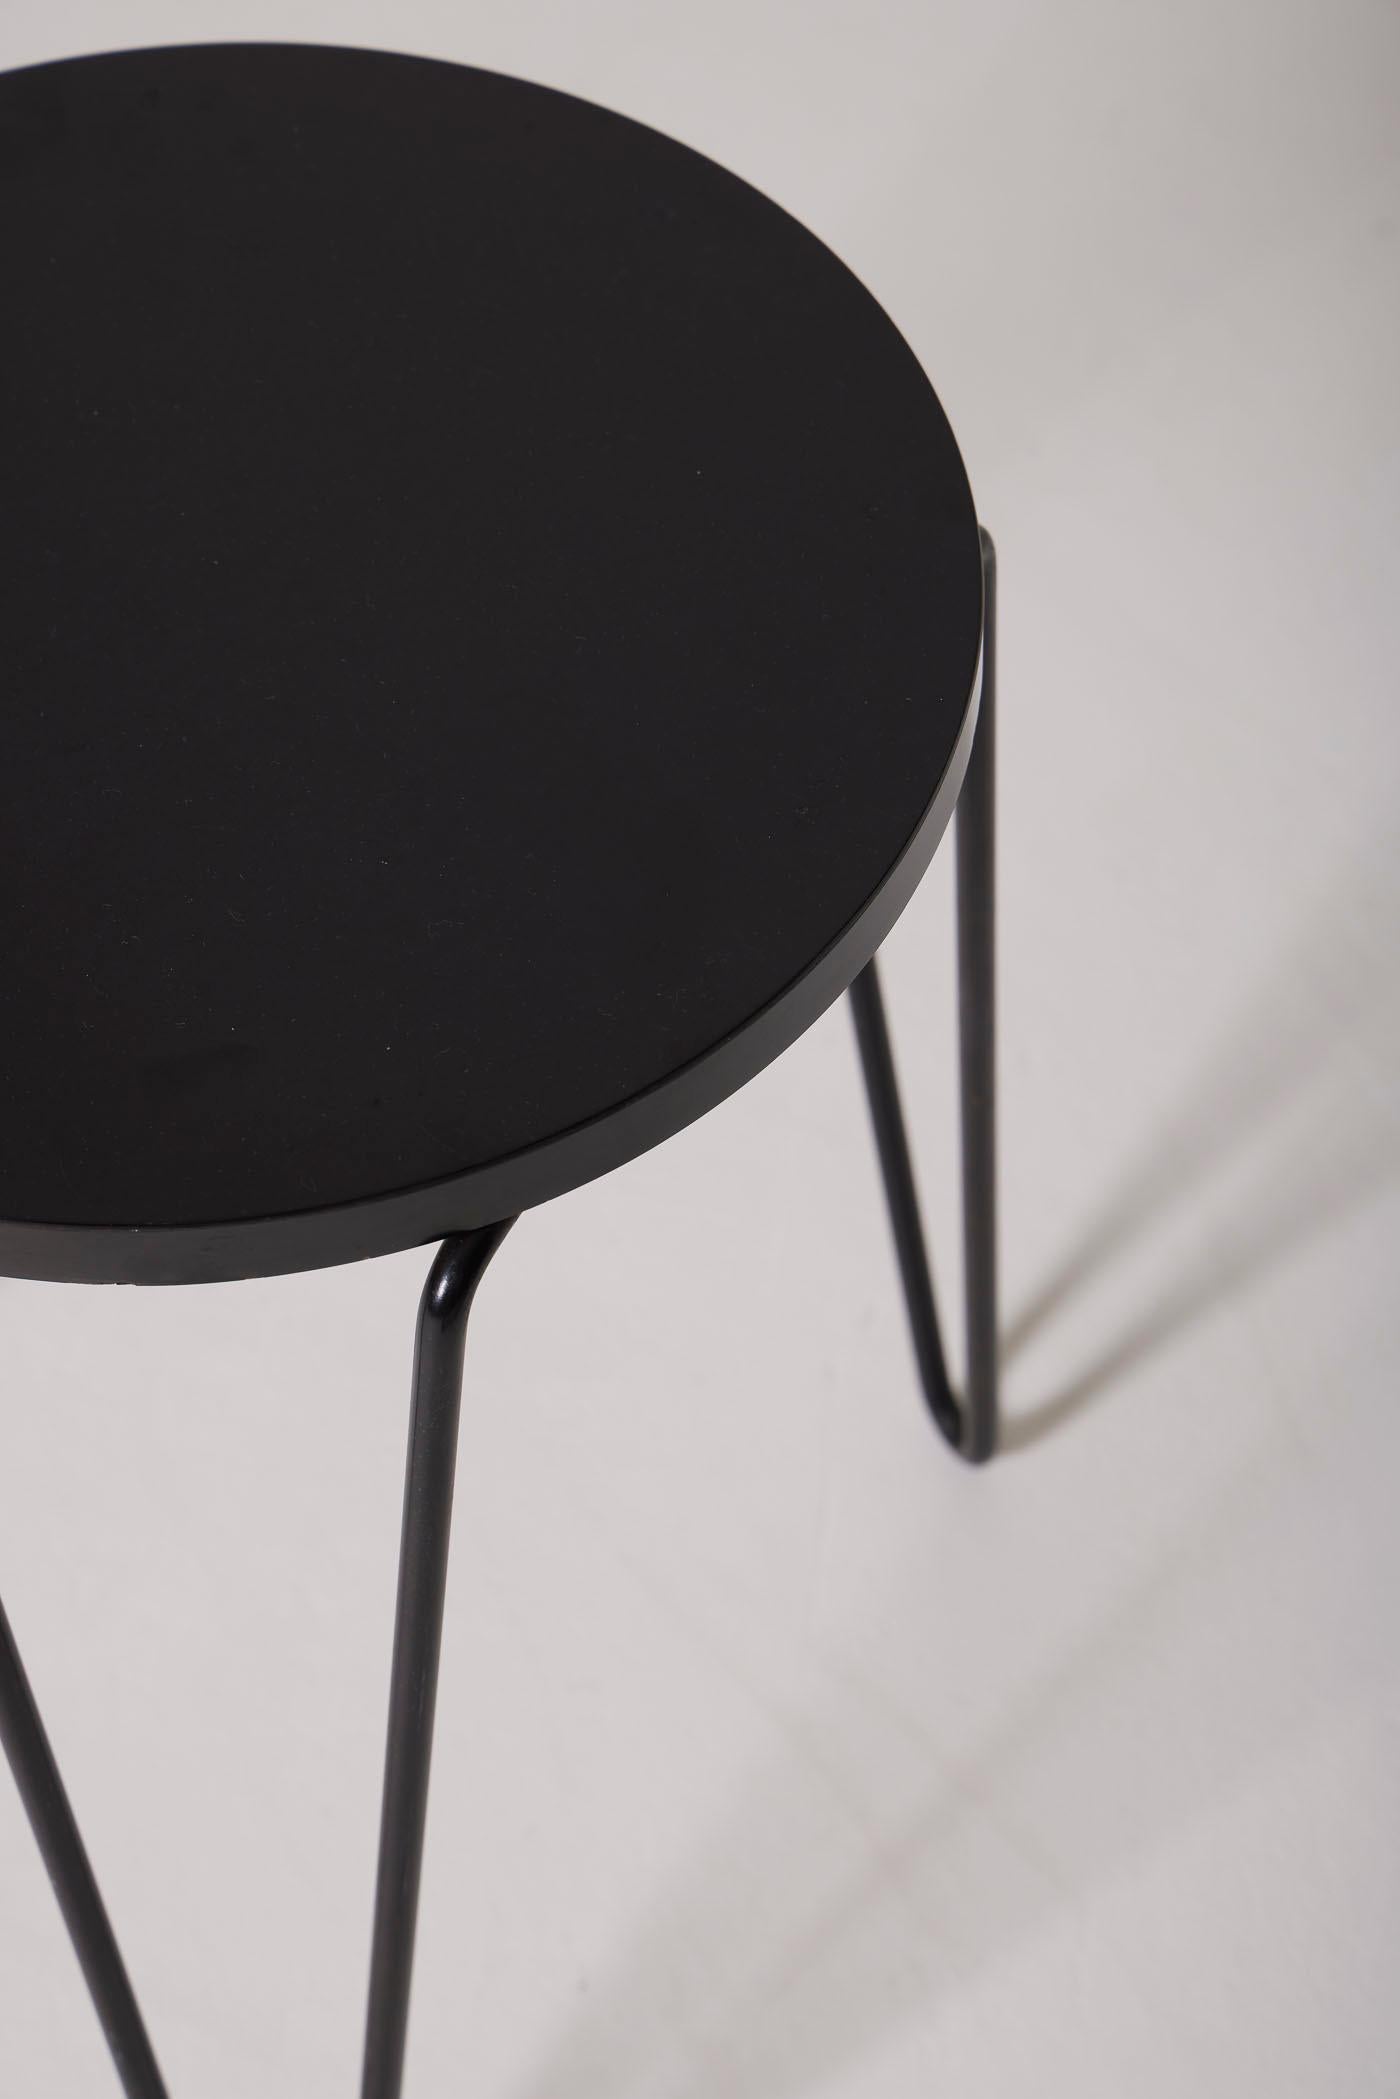 Formica Florence Knoll stool For Sale